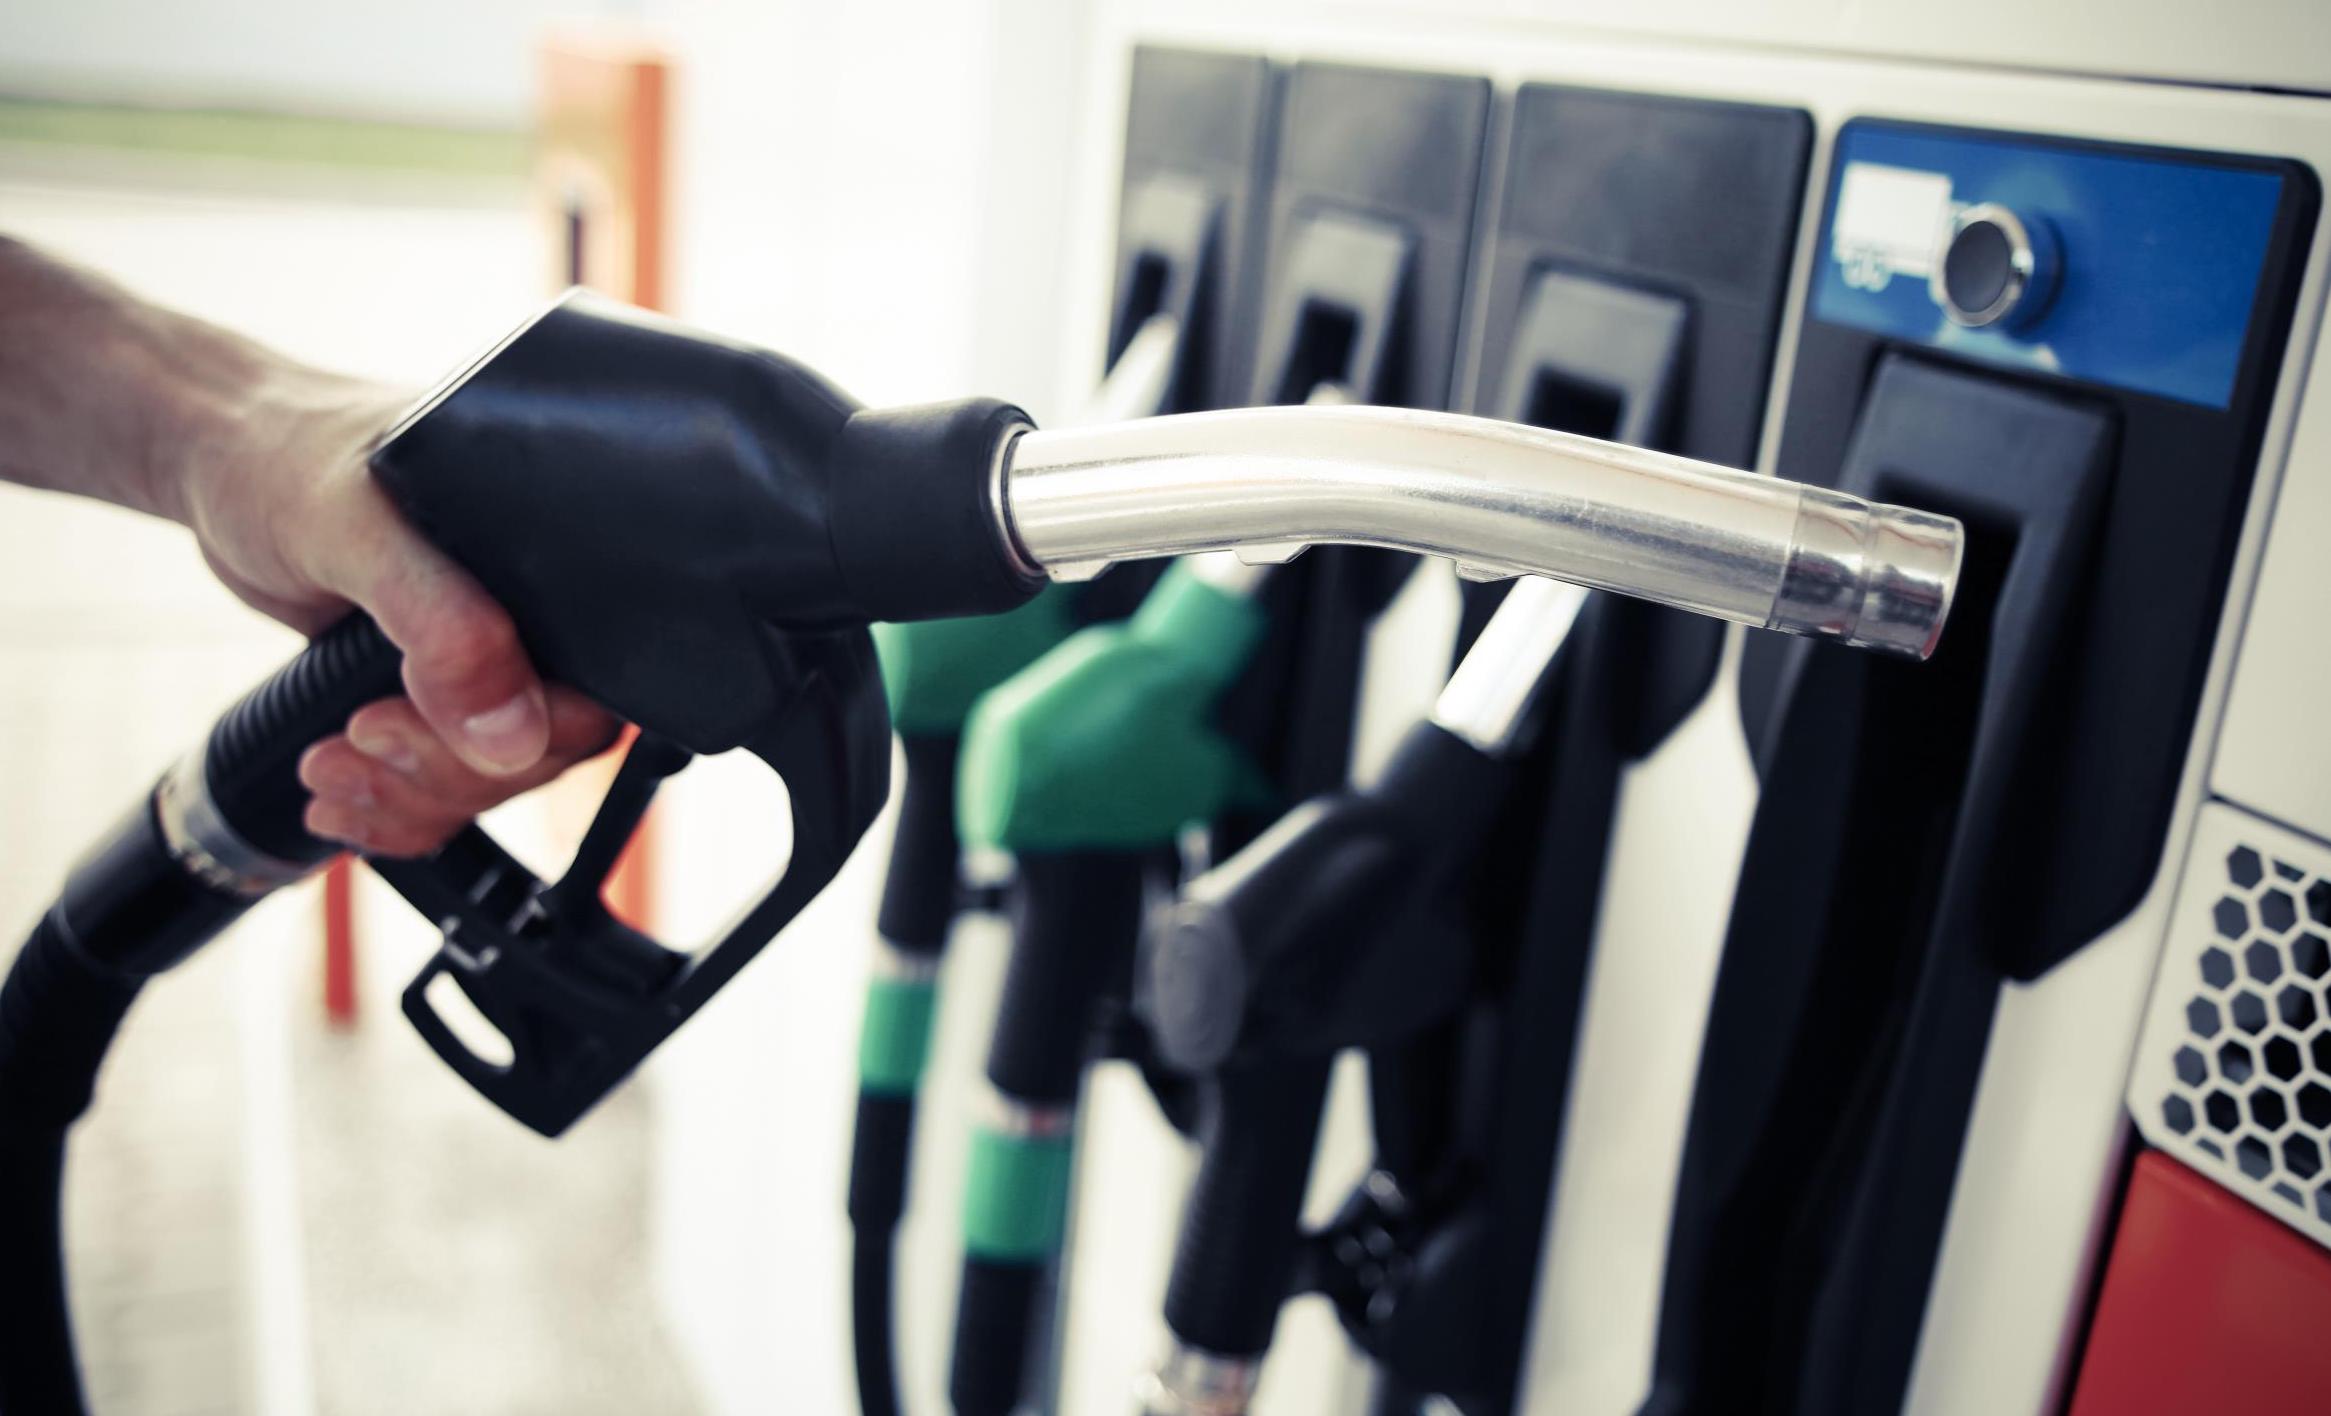 Federal government slashes fuel excise by 50% in Australia, for 6 months